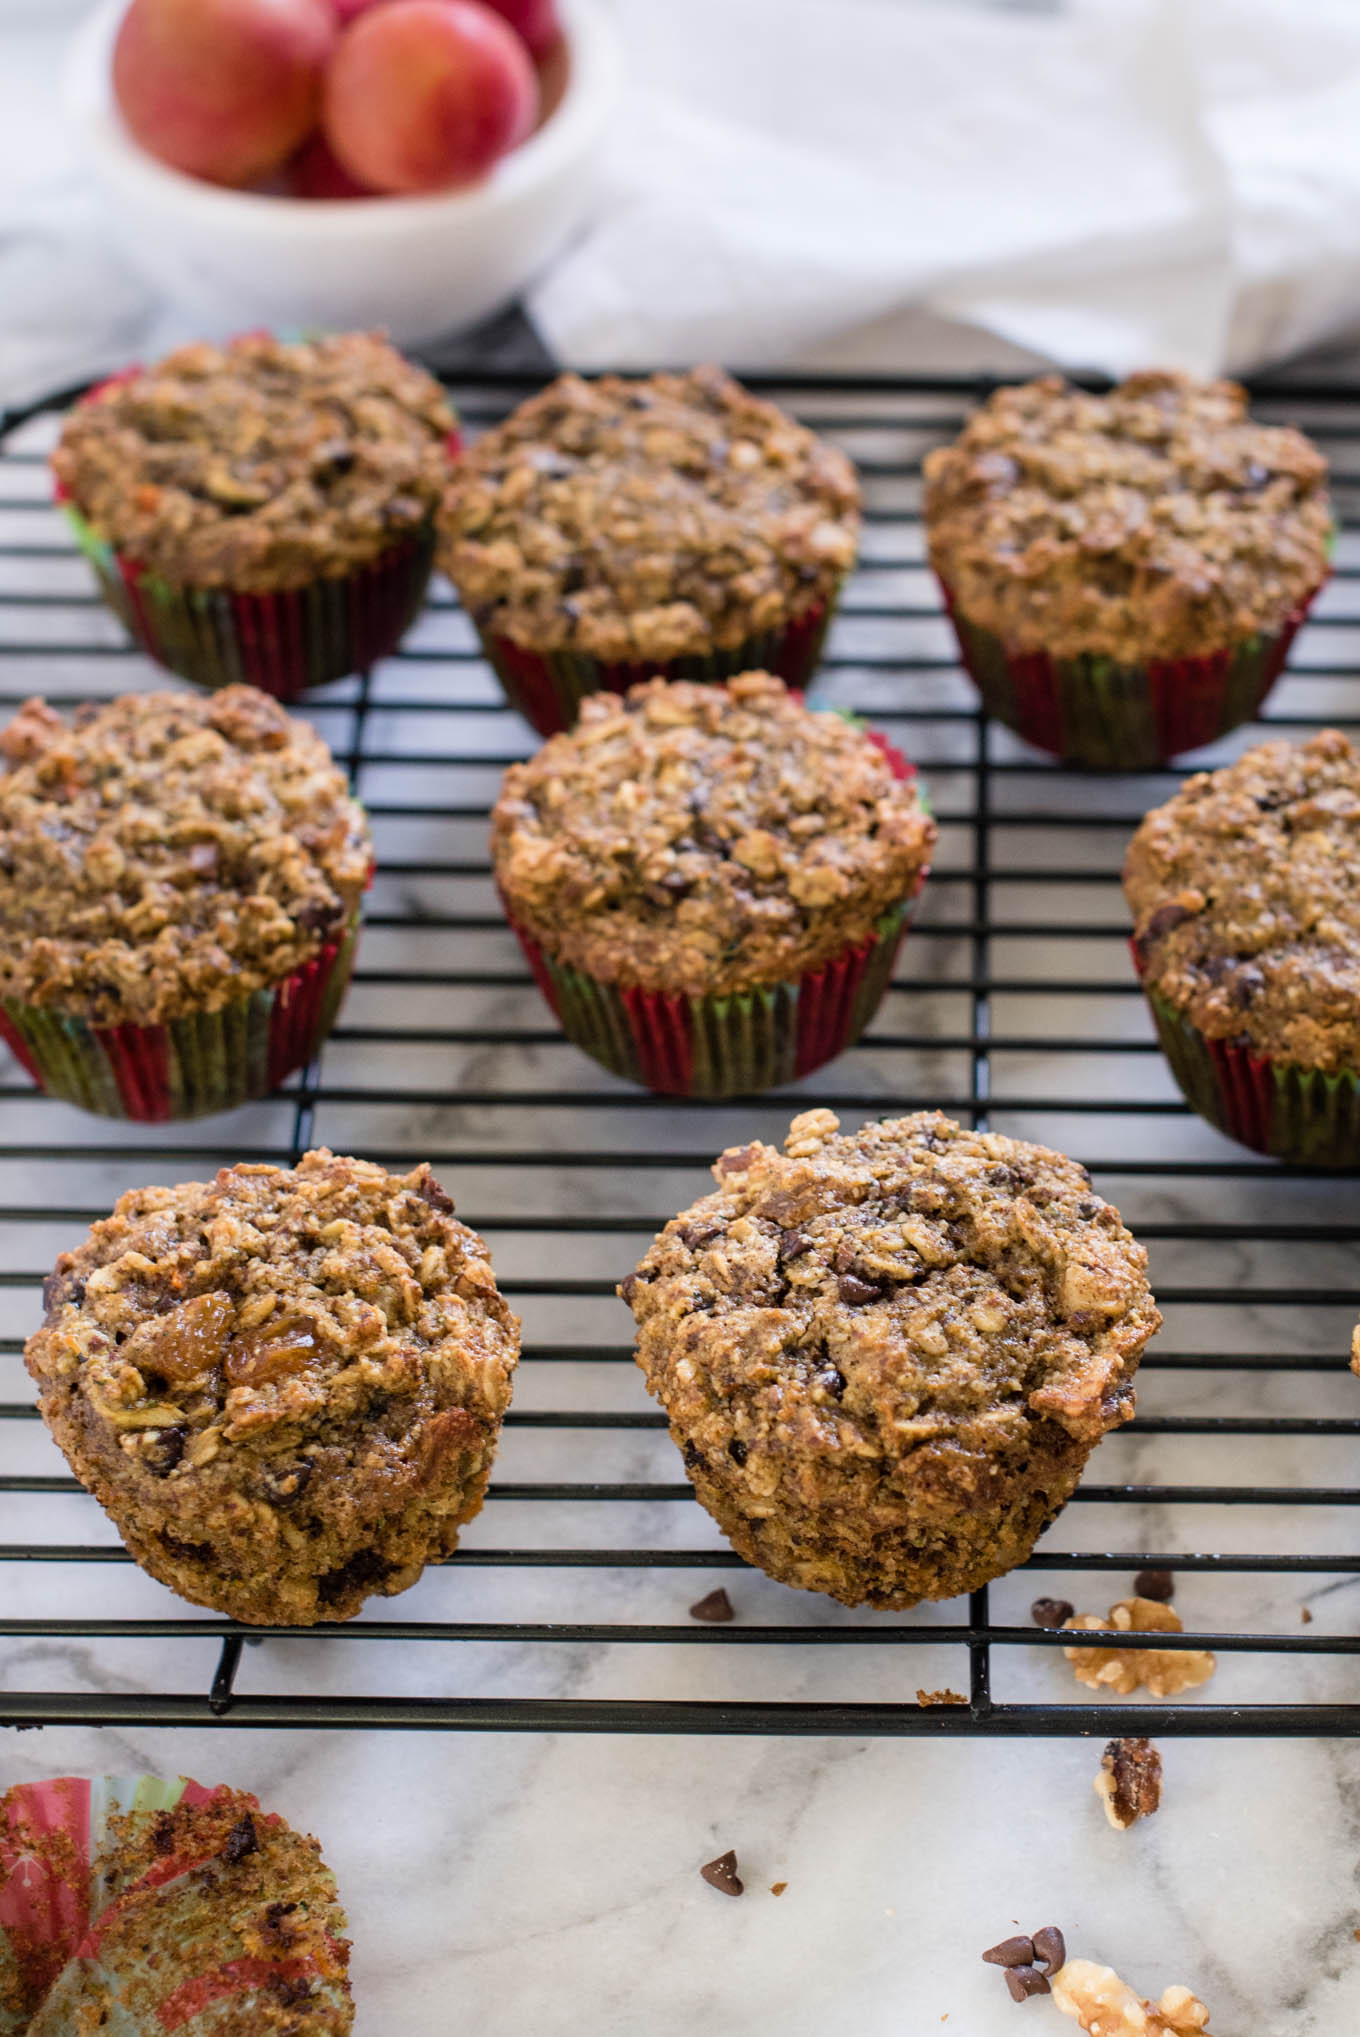 Morning Glory Muffins- packed with oats, almond flour, veggies and more | www.nutritiouseats.com